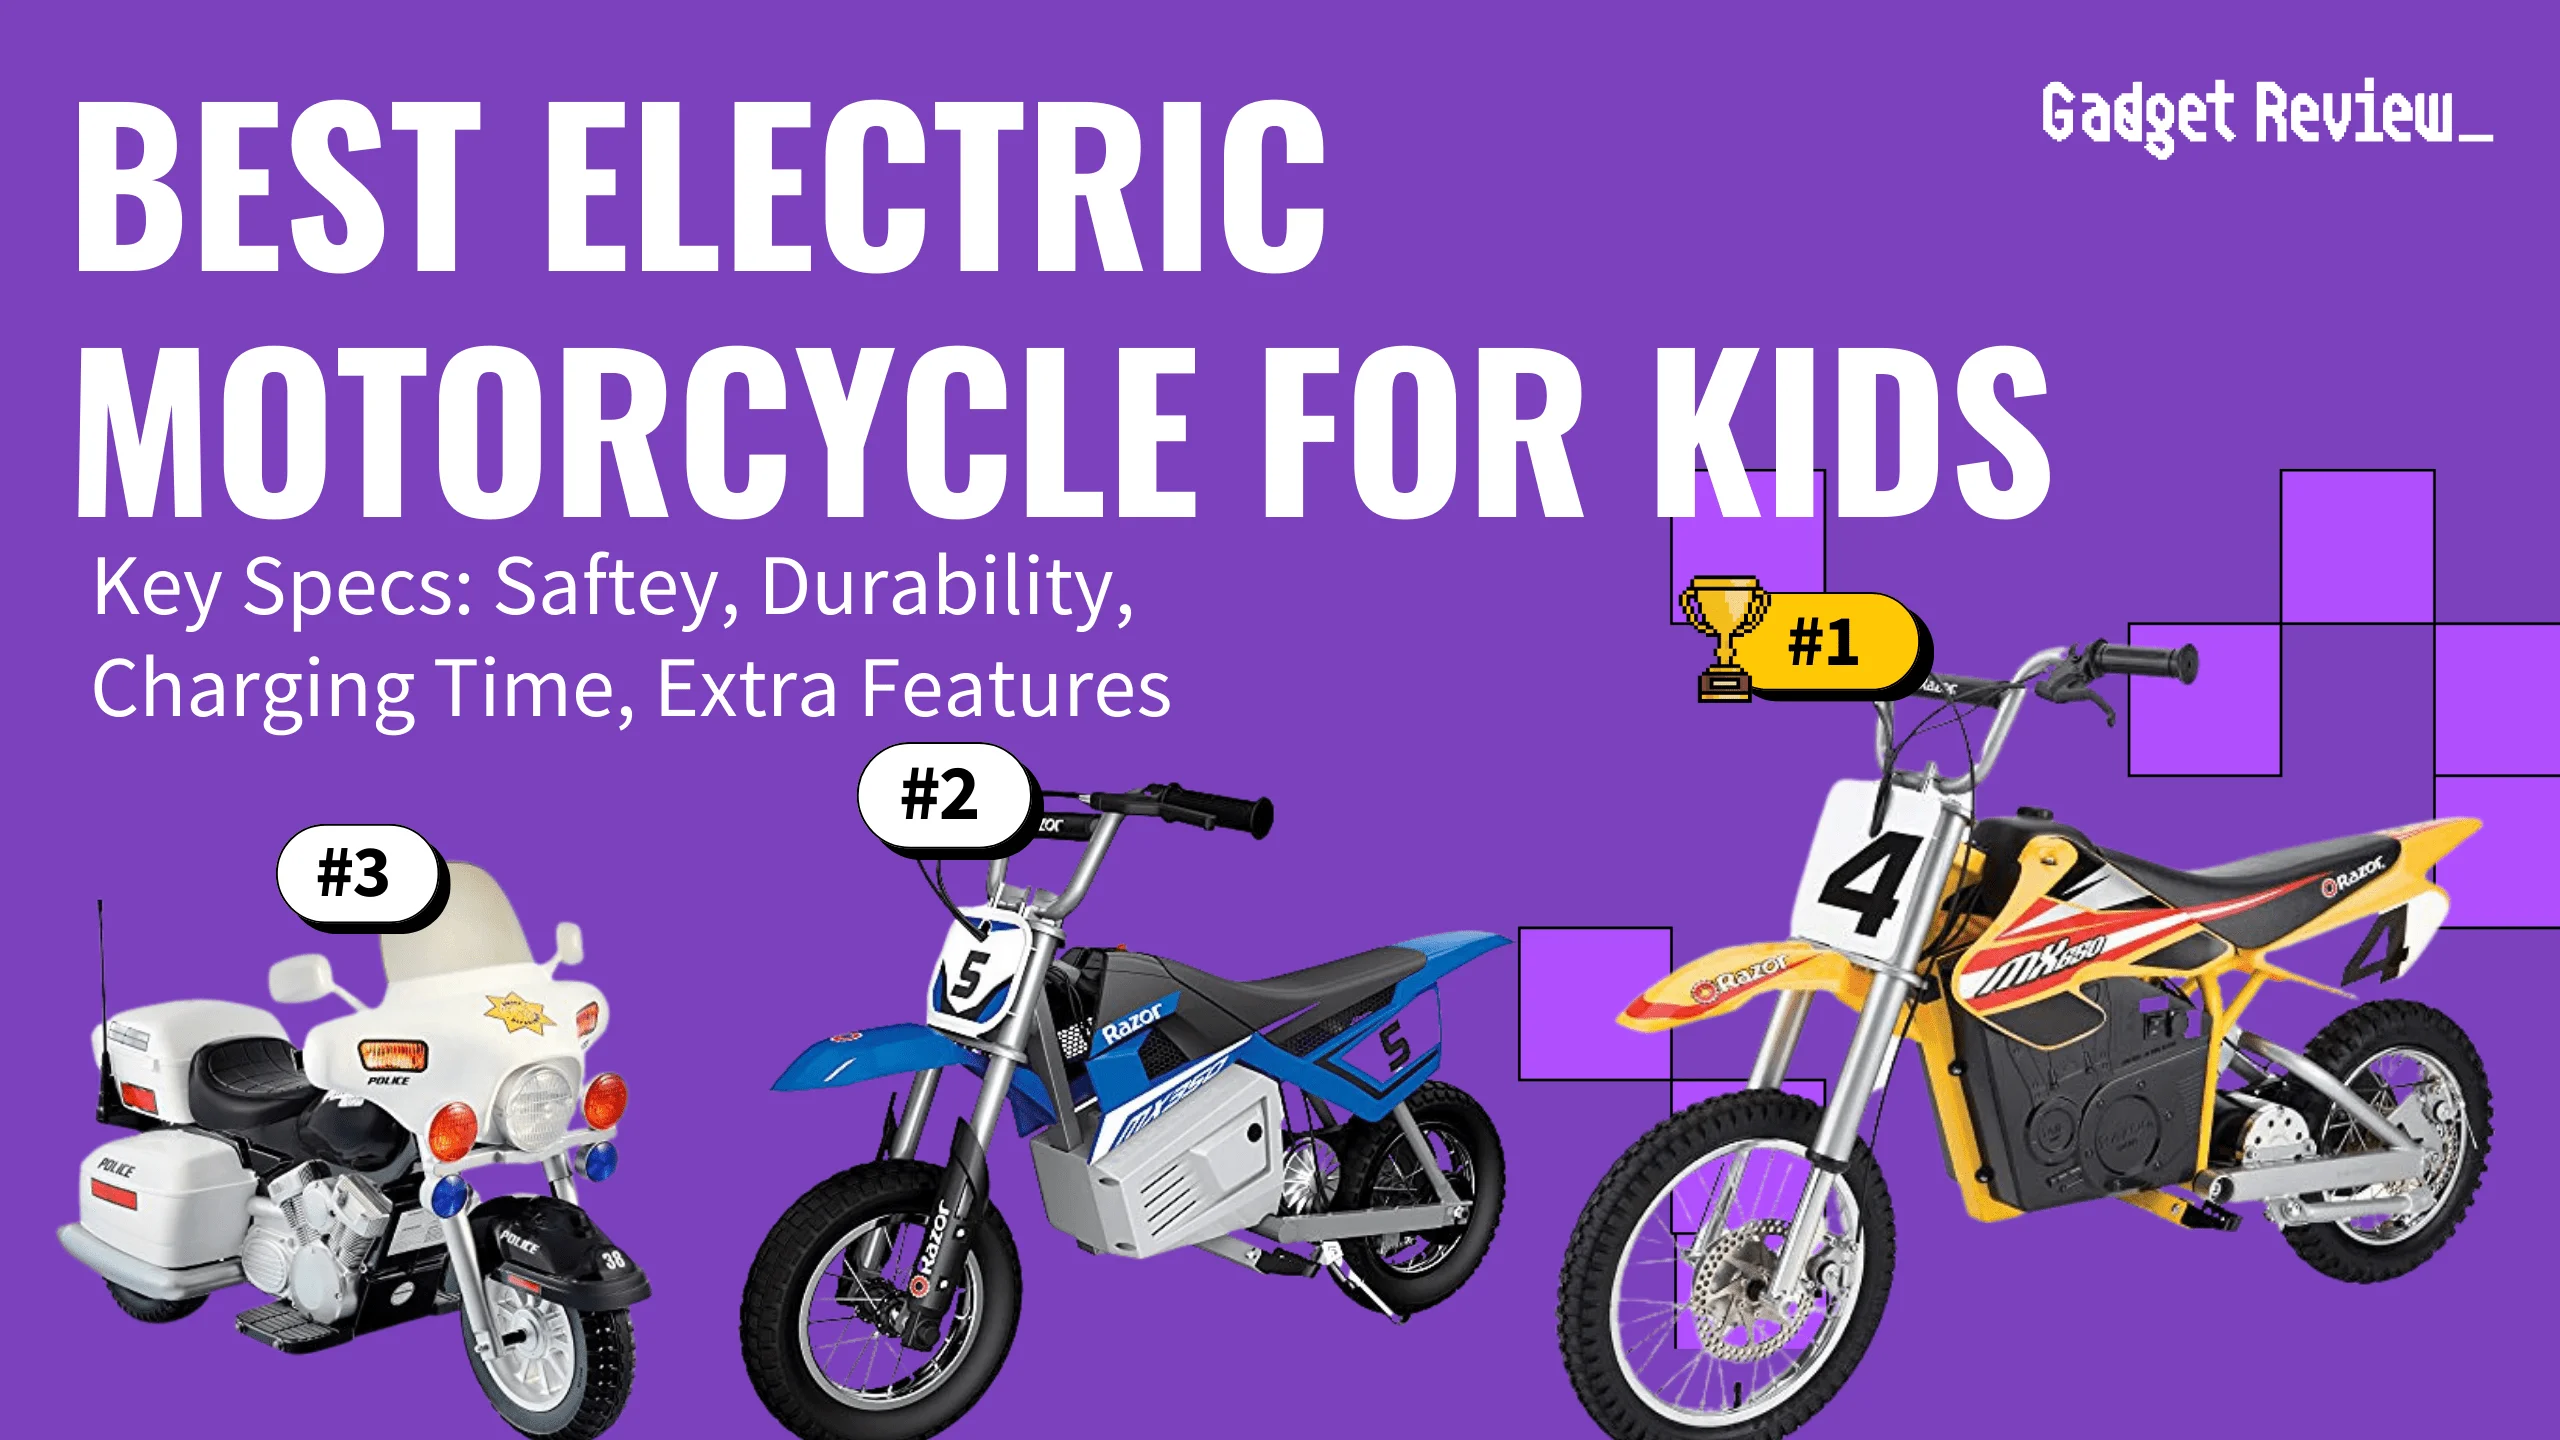 Best Electric Motorcycle for Kids